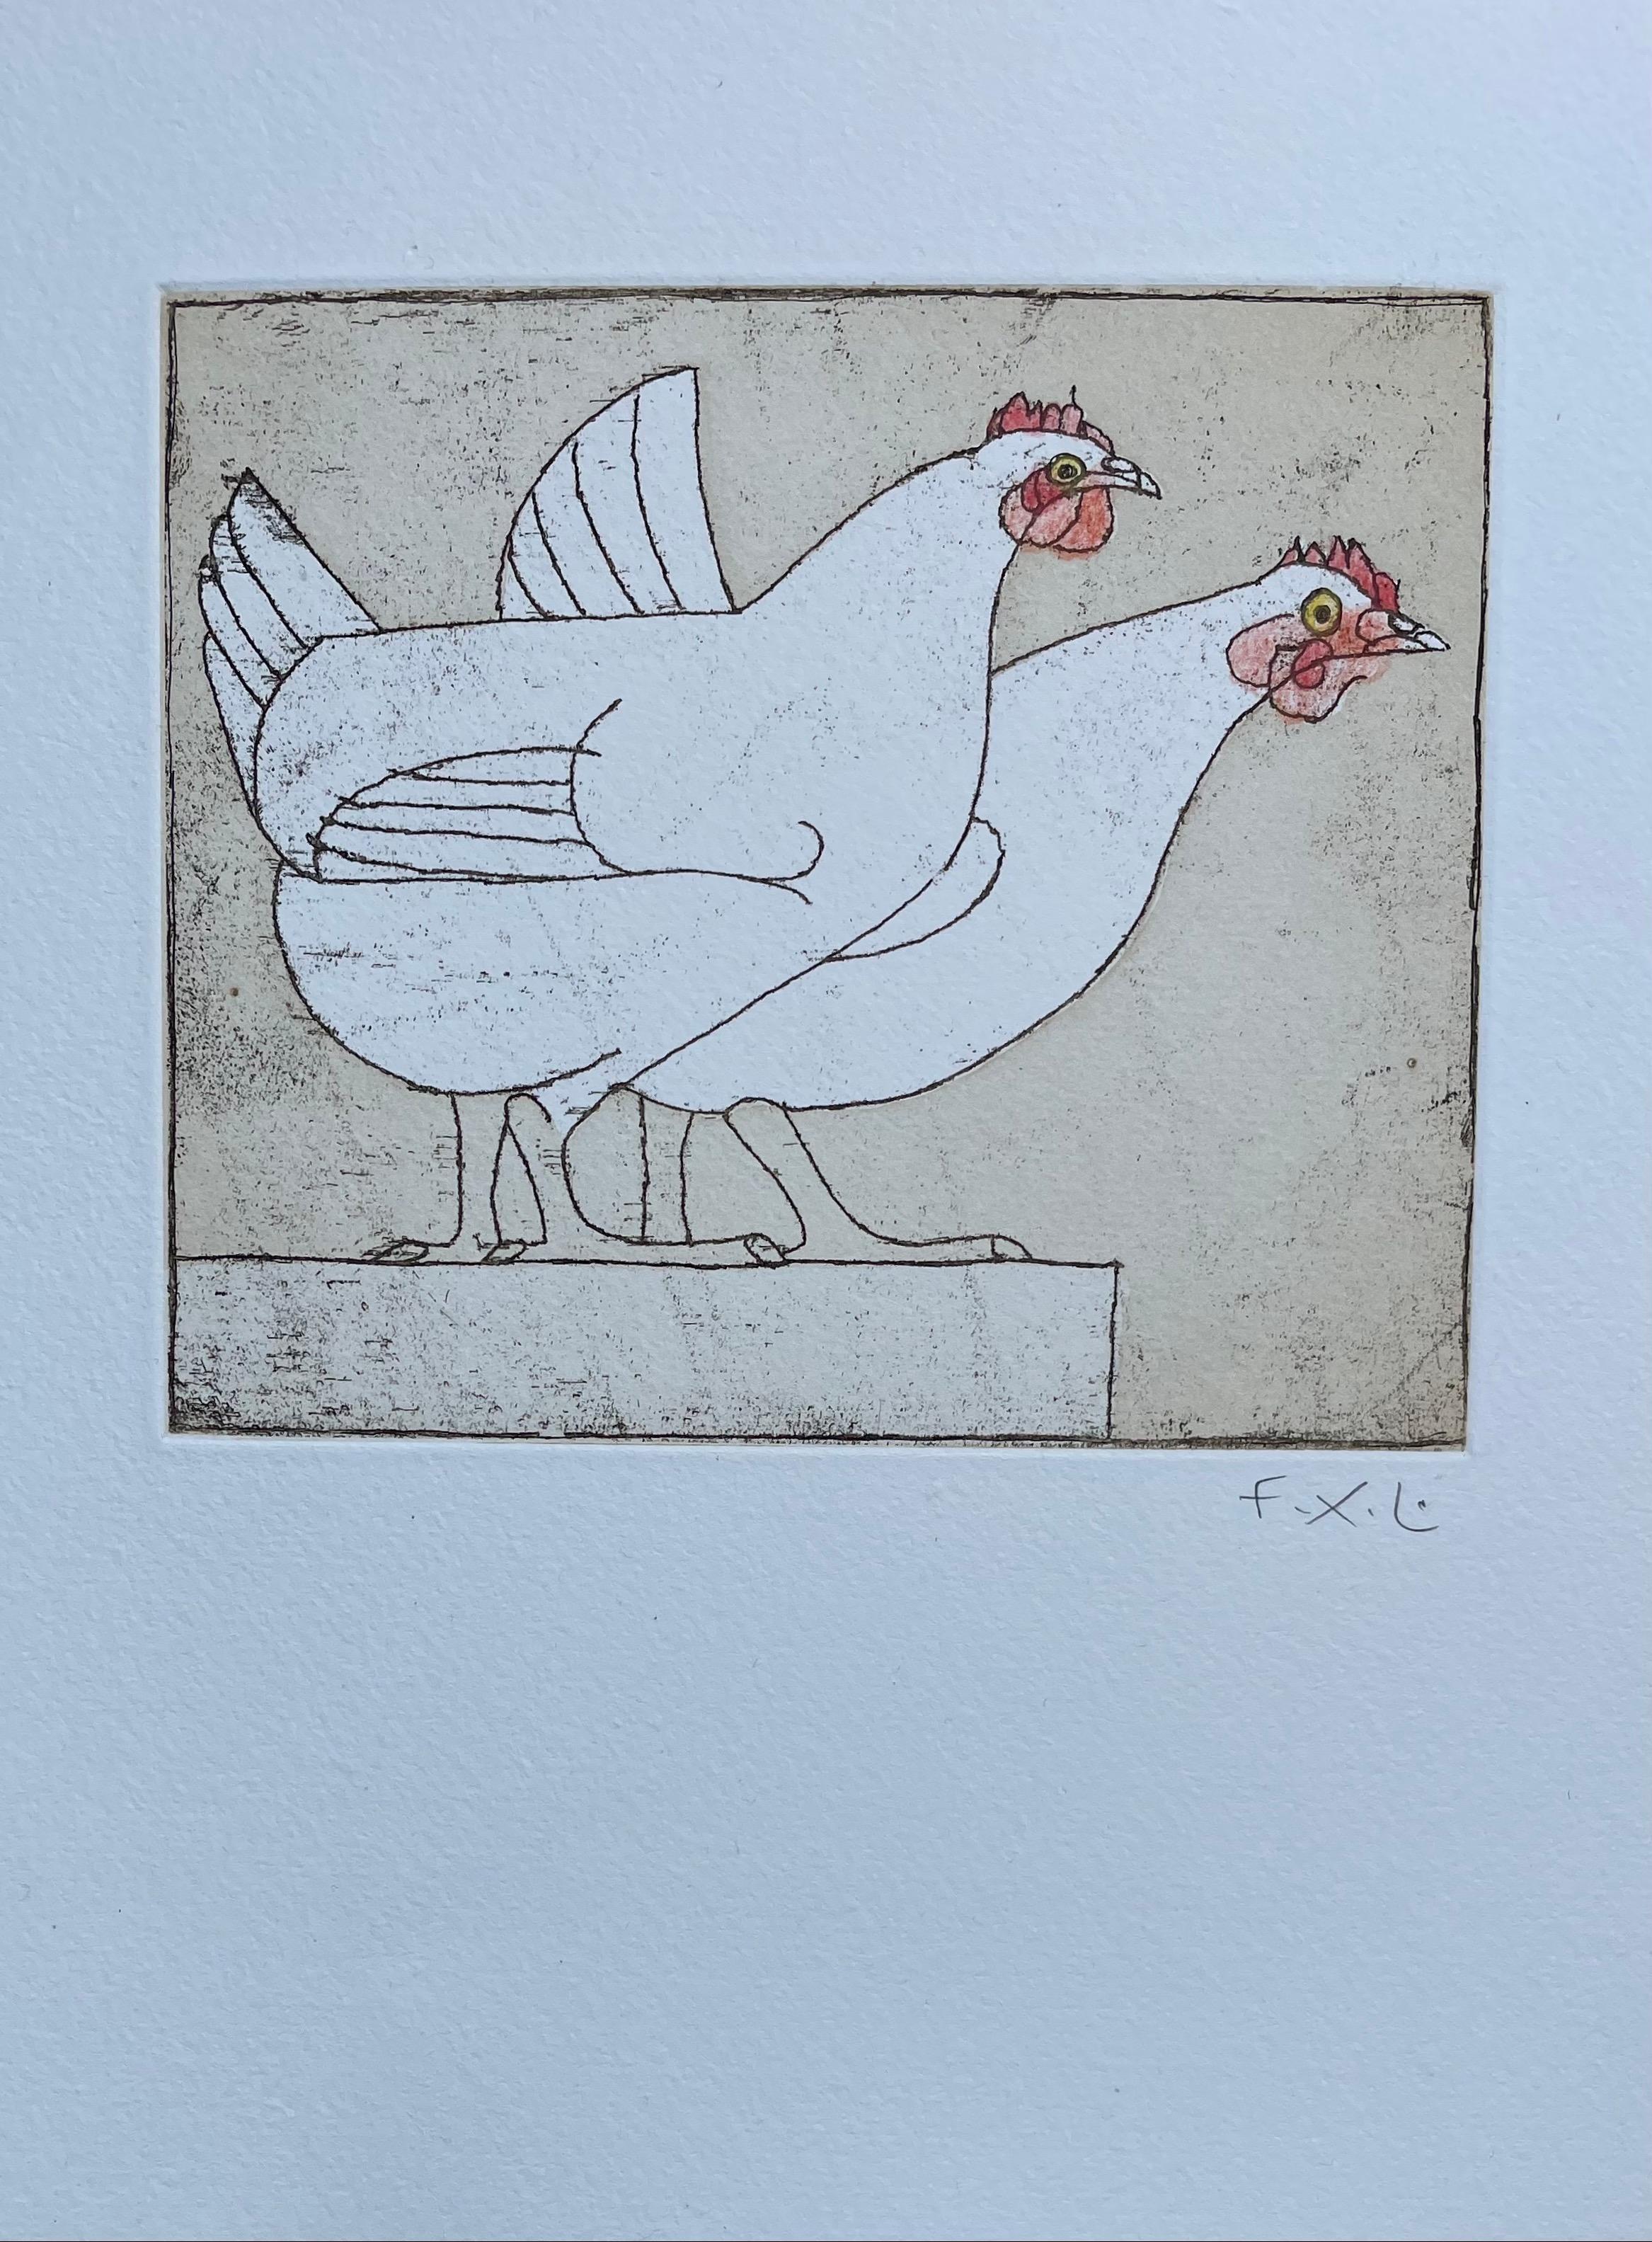 François-Xavier Lalanne (1927-2008) Les Poules (the hens), 2004
Original print (etching on paper) hand signed in pencil by François Xavier Lalanne and untitled 